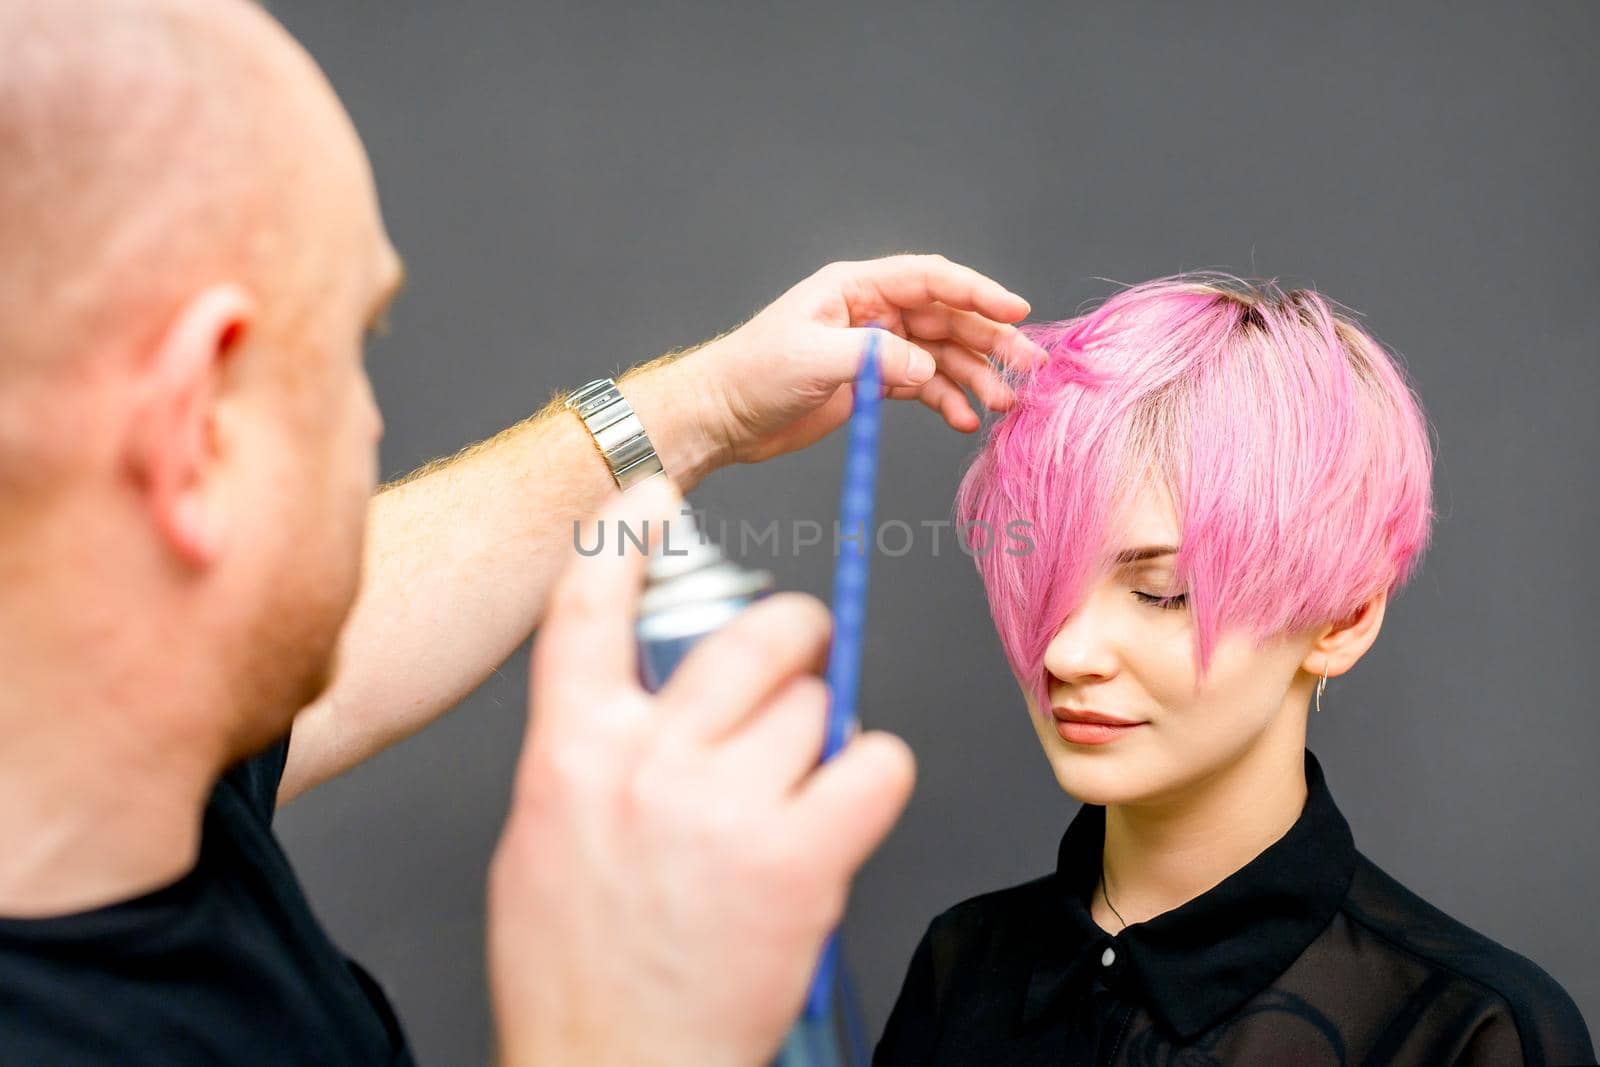 The hairdresser is using hair spray to fix the short pink hairstyle of the young caucasian woman in the hair salon. by okskukuruza